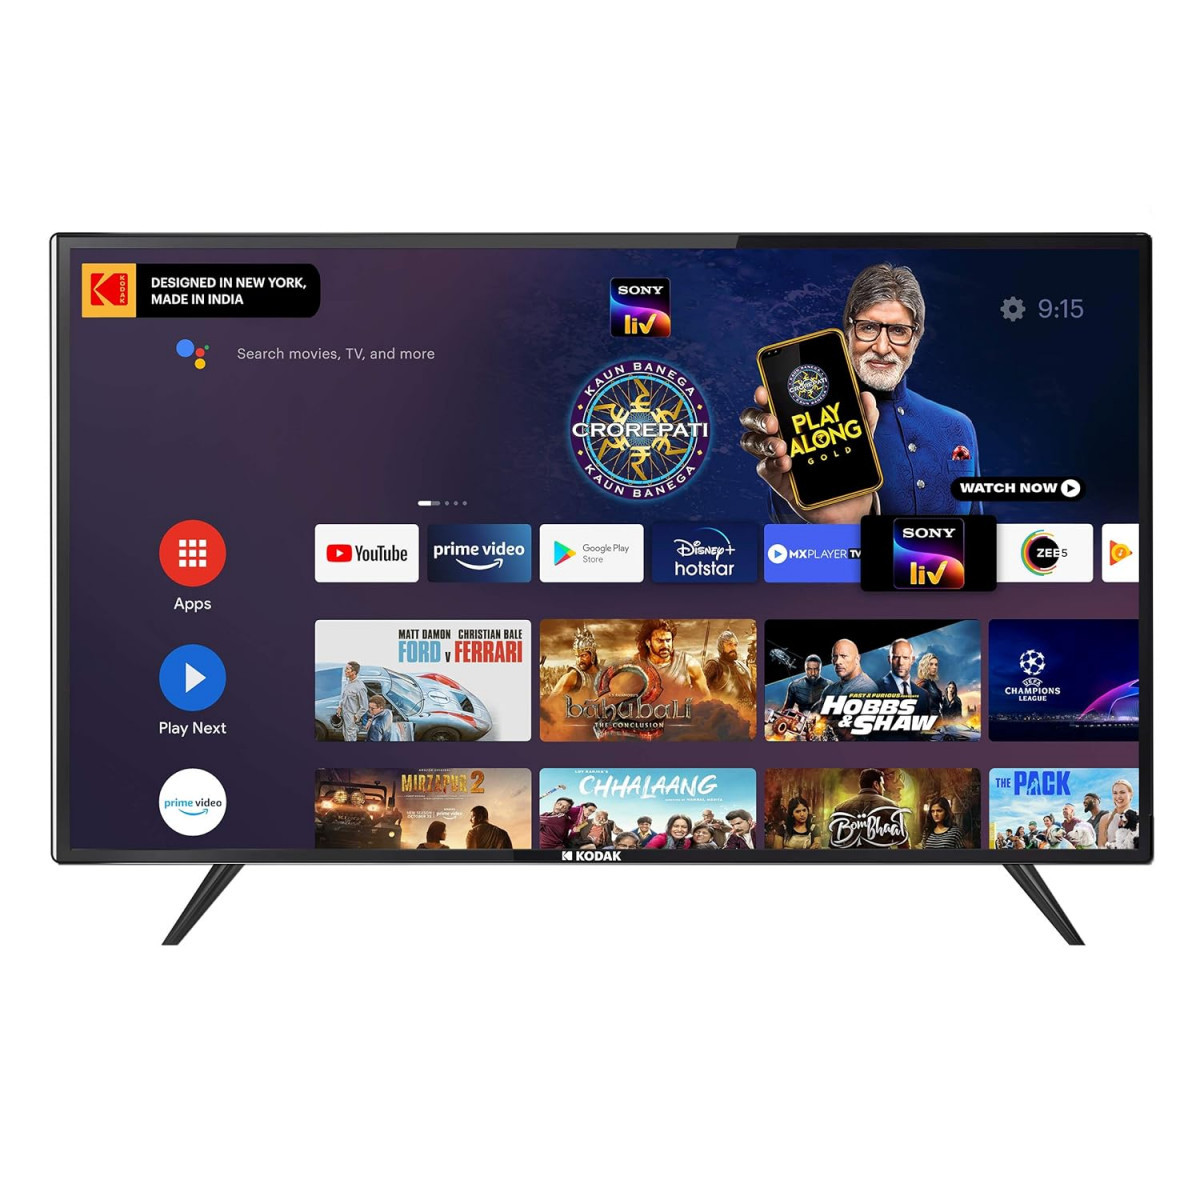 Kodak 108 cm 43 inches 4K Ultra HD Certified Android LED TV 43UHDX7XPRO Black